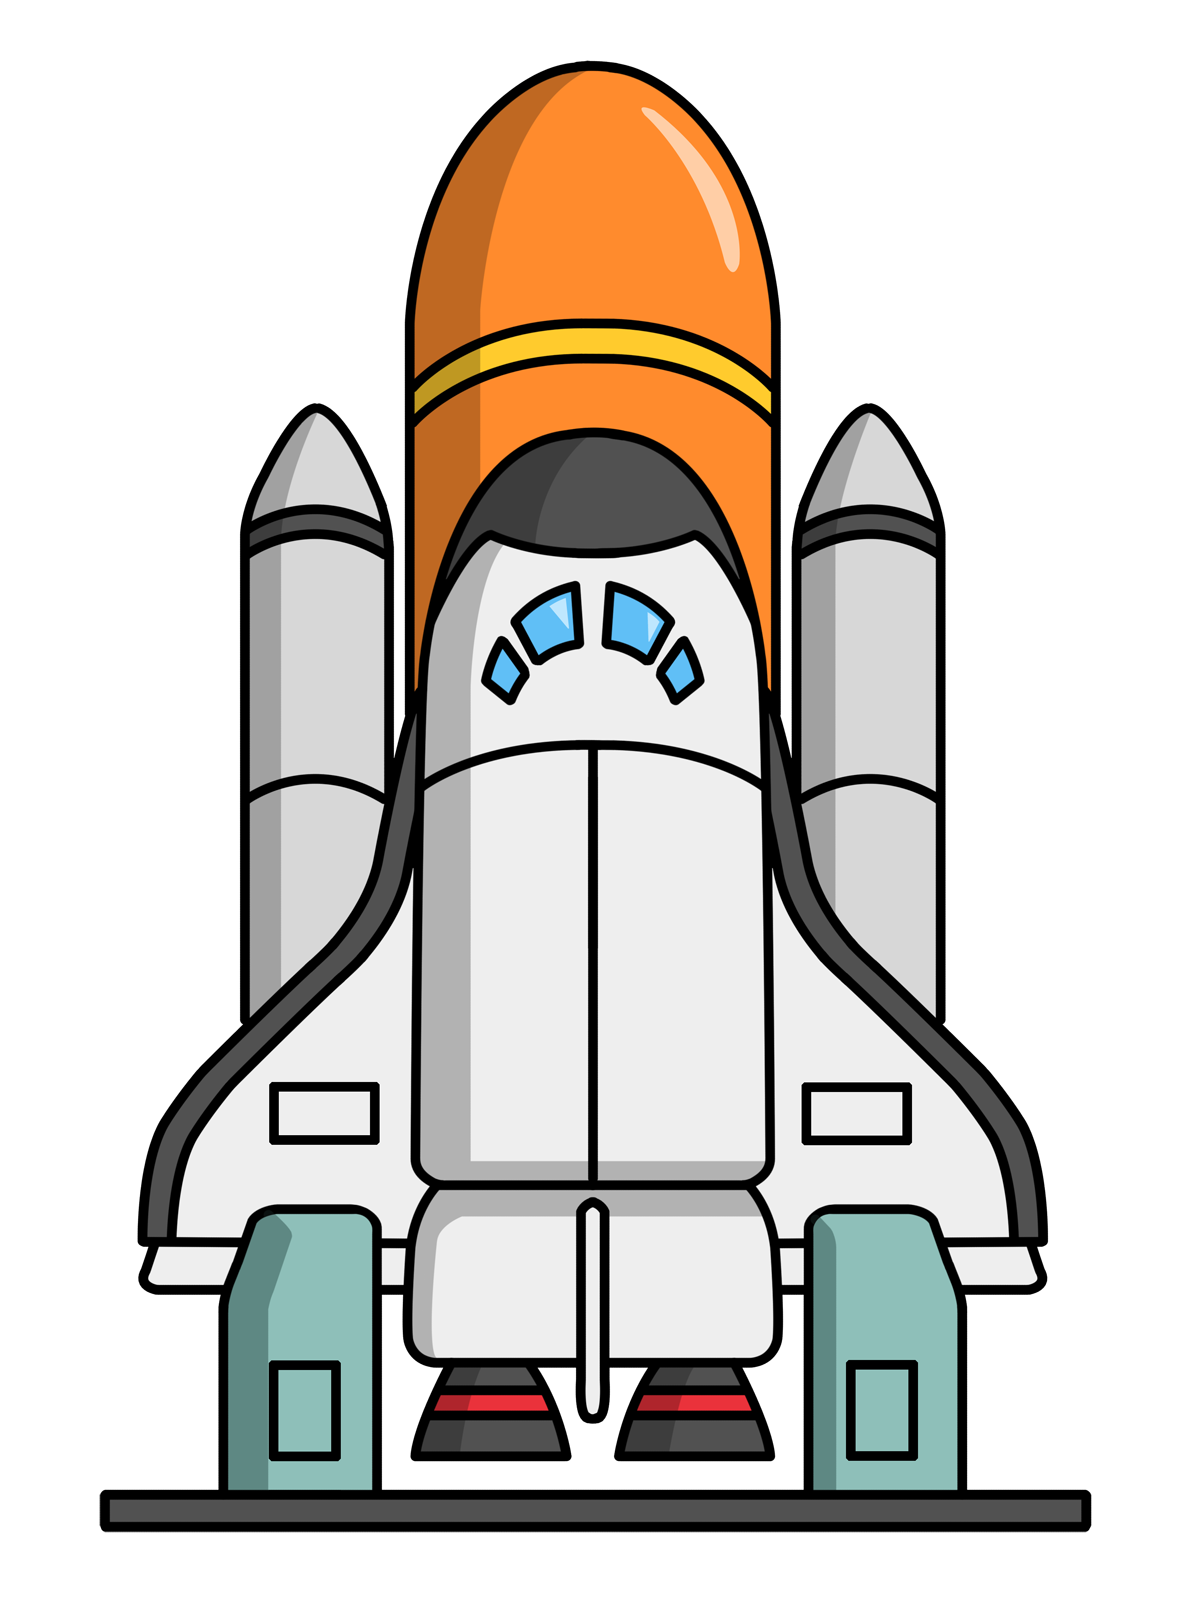 Space clip art for kids free clipart images - Cliparting.com